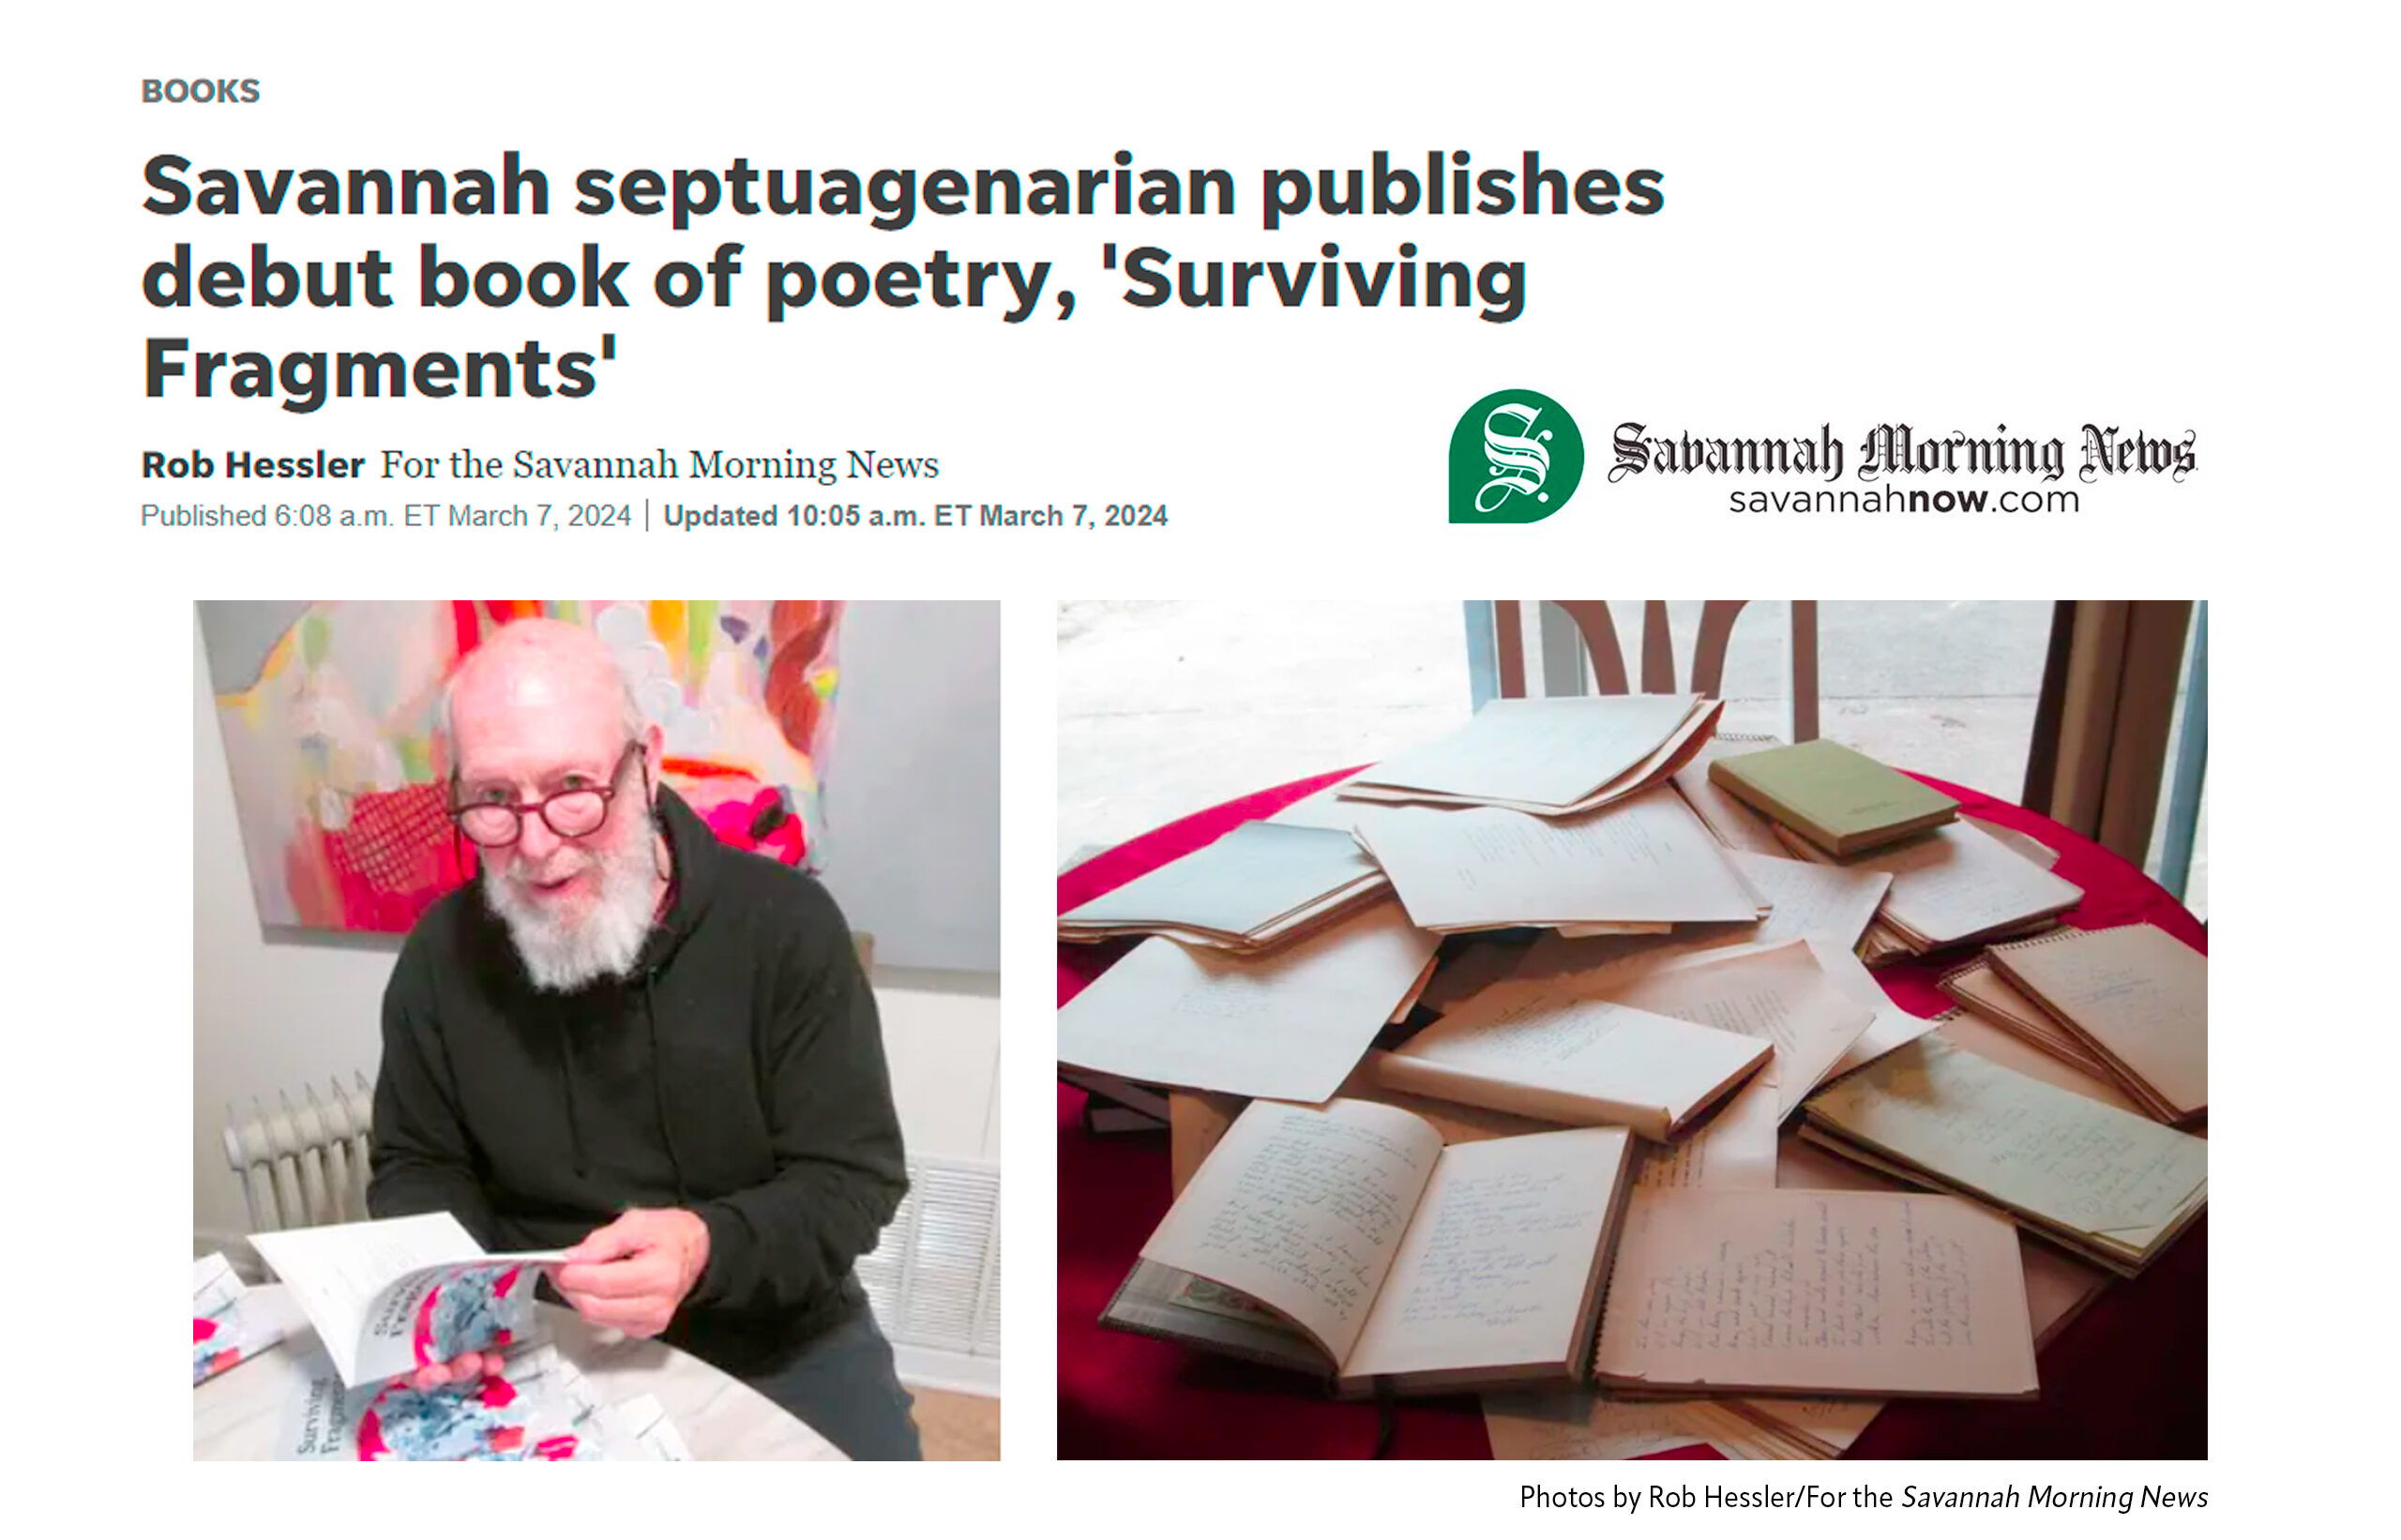 Rob Hessler's article in the Savannah Morning News, "Savannah Septuagenarian Publishes Debut Book of Poetry, 'Surviving Fragments'"